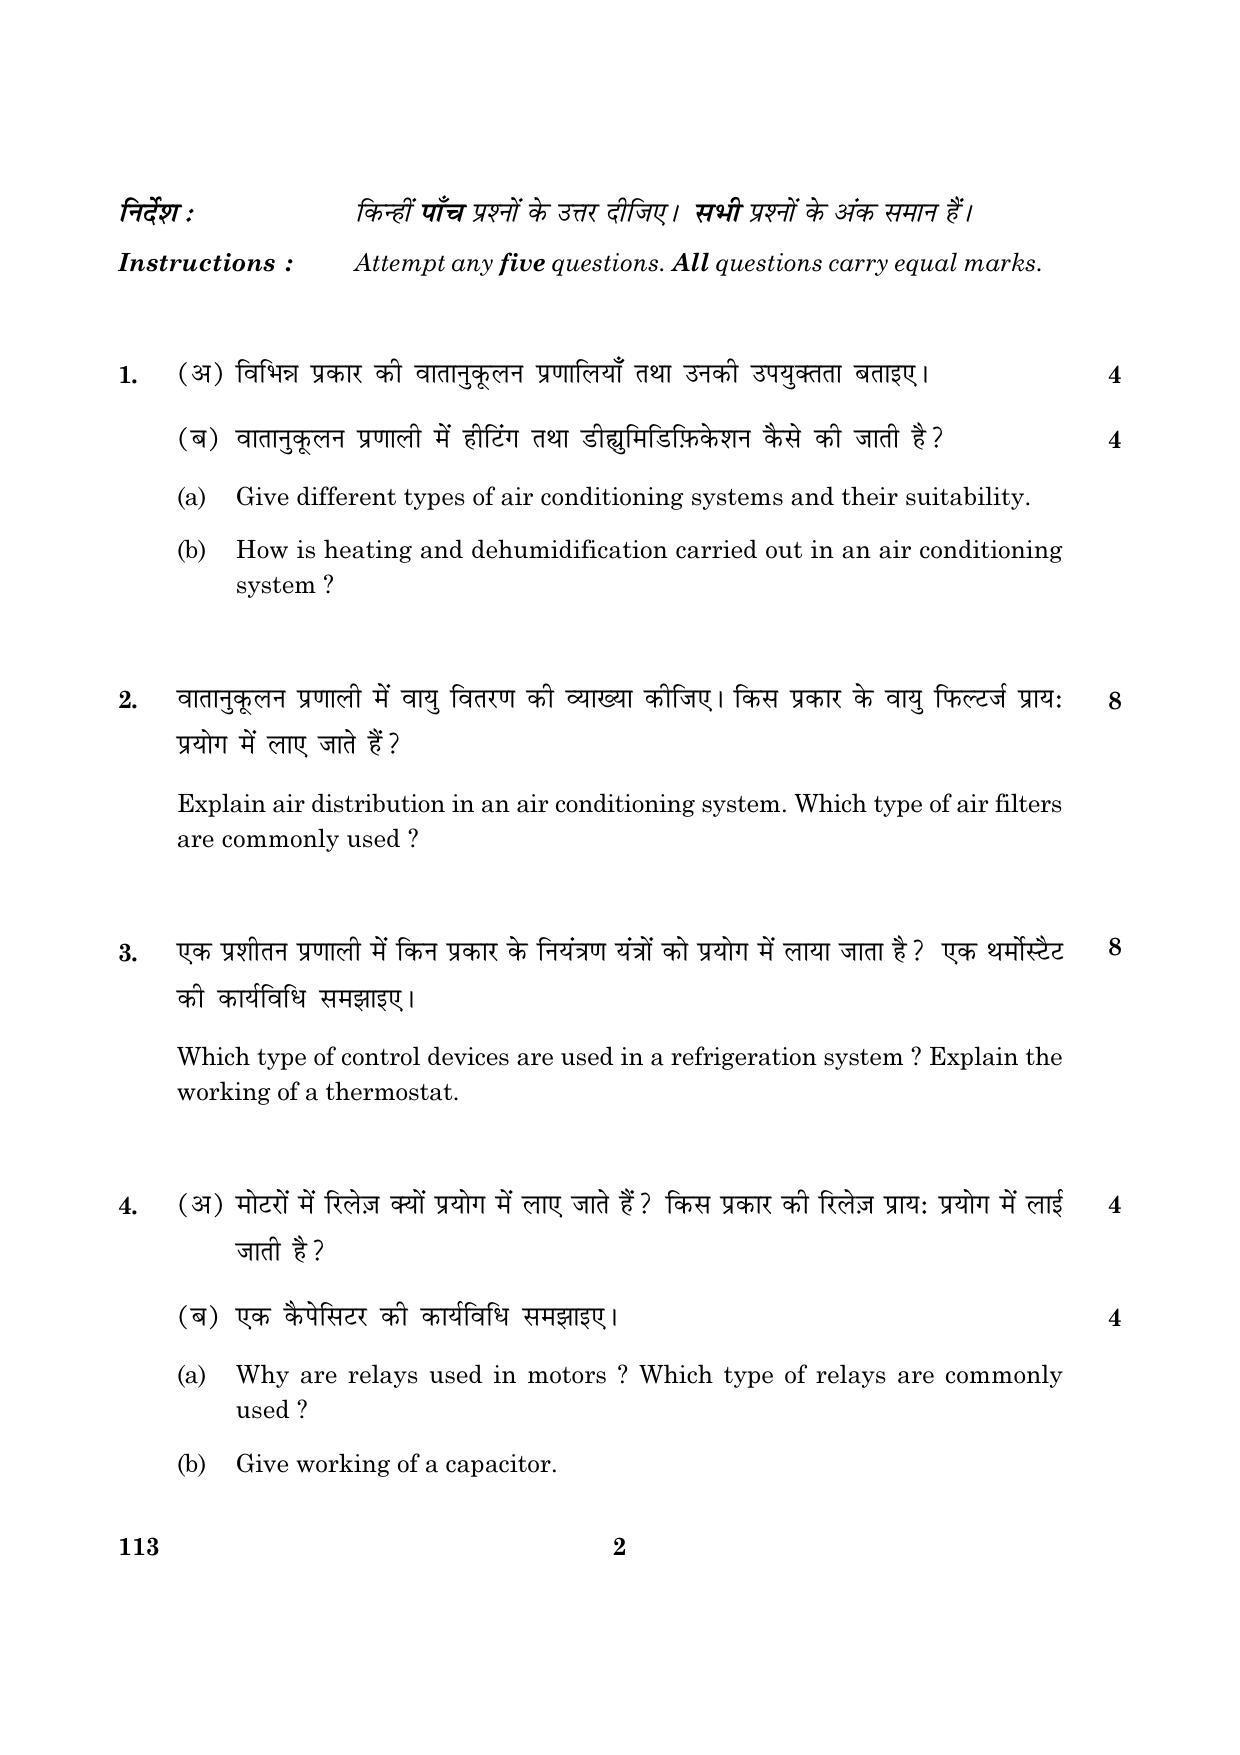 CBSE Class 12 113 Air-Conditioning & Refrigeration-IV 2016 Question Paper - Page 2